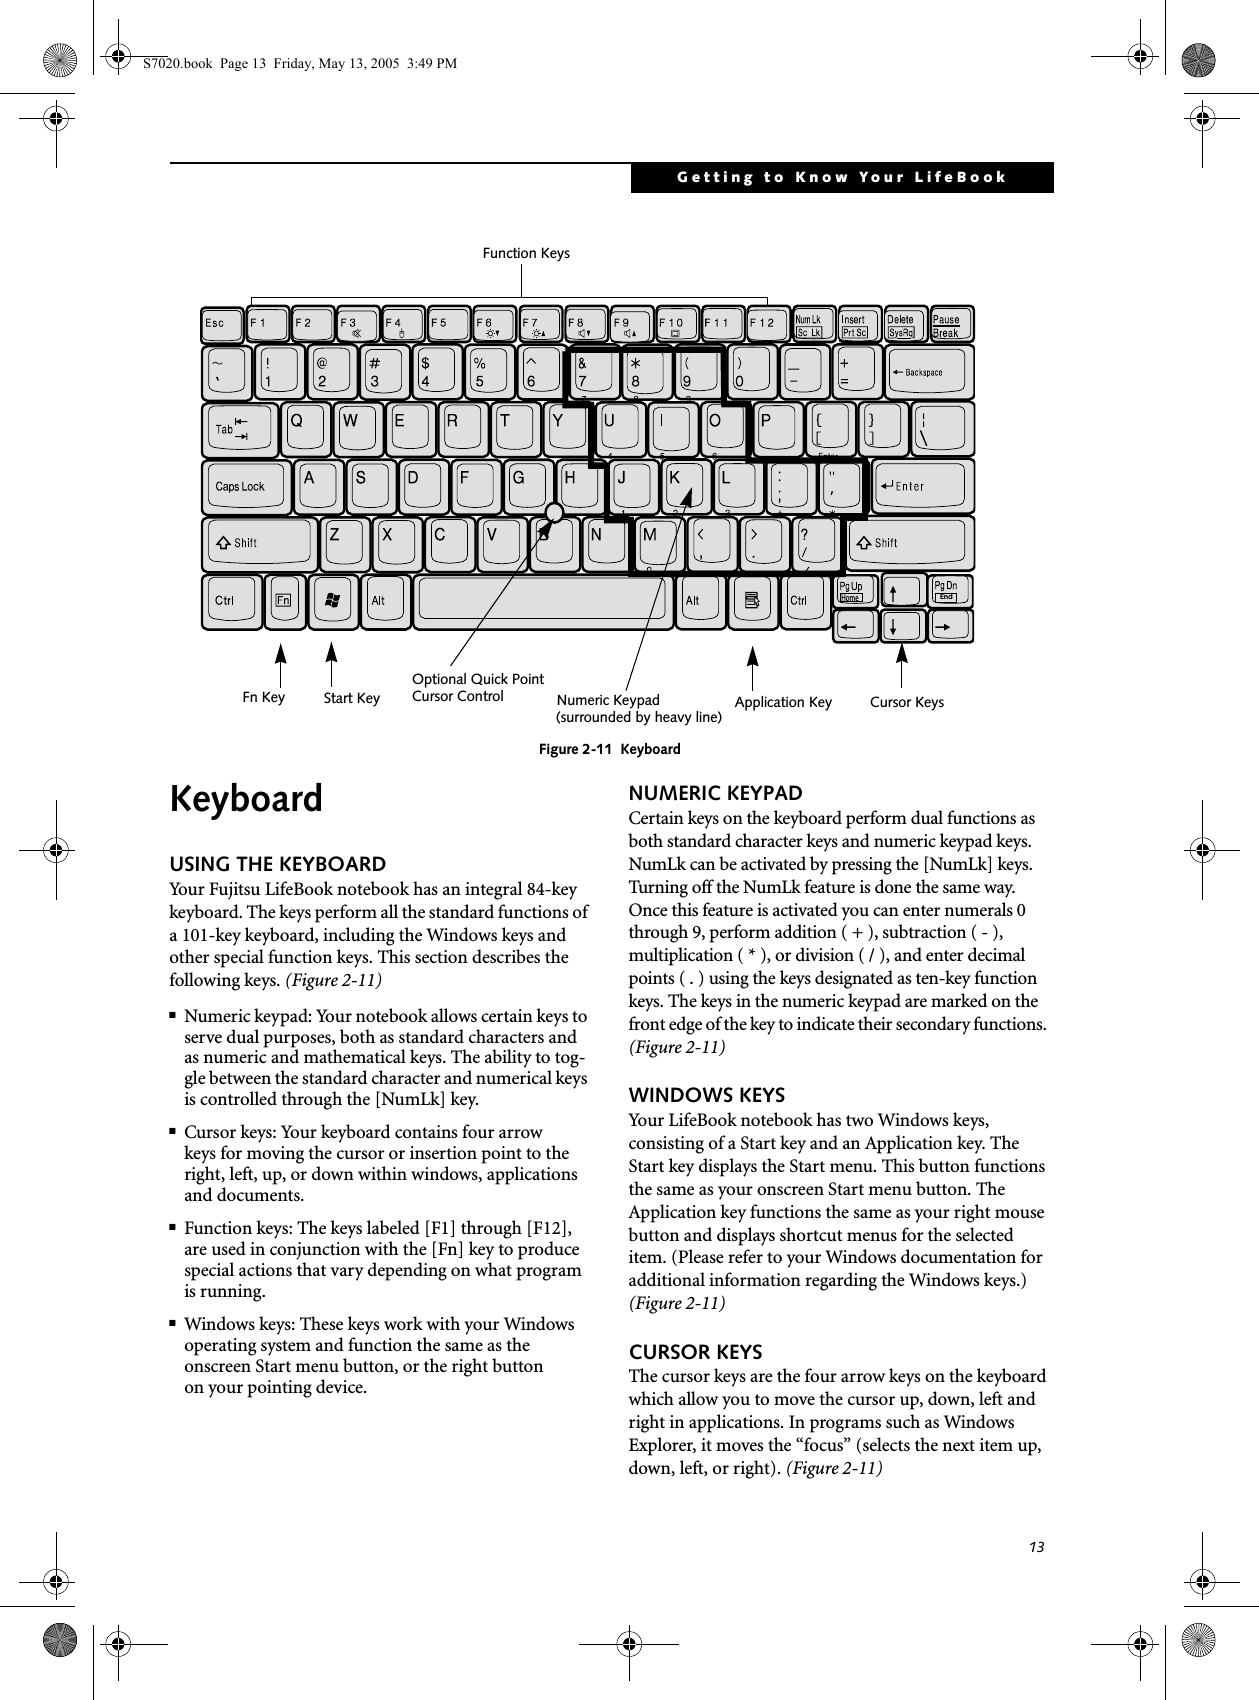 13Getting to Know Your LifeBookFigure 2-11  KeyboardKeyboard USING THE KEYBOARDYour Fujitsu LifeBook notebook has an integral 84-key keyboard. The keys perform all the standard functions of a 101-key keyboard, including the Windows keys and other special function keys. This section describes the following keys. (Figure 2-11)■Numeric keypad: Your notebook allows certain keys to serve dual purposes, both as standard characters and as numeric and mathematical keys. The ability to tog-gle between the standard character and numerical keys is controlled through the [NumLk] key.■Cursor keys: Your keyboard contains four arrowkeys for moving the cursor or insertion point to the right, left, up, or down within windows, applications and documents. ■Function keys: The keys labeled [F1] through [F12], are used in conjunction with the [Fn] key to produce special actions that vary depending on what program is running. ■Windows keys: These keys work with your Windows operating system and function the same as the onscreen Start menu button, or the right buttonon your pointing device.NUMERIC KEYPADCertain keys on the keyboard perform dual functions as both standard character keys and numeric keypad keys. NumLk can be activated by pressing the [NumLk] keys. Turning off the NumLk feature is done the same way. Once this feature is activated you can enter numerals 0 through 9, perform addition ( + ), subtraction ( - ),multiplication ( * ), or division ( / ), and enter decimal points ( . ) using the keys designated as ten-key function keys. The keys in the numeric keypad are marked on the front edge of the key to indicate their secondary functions. (Figure 2-11) WINDOWS KEYSYour LifeBook notebook has two Windows keys, consisting of a Start key and an Application key. The Start key displays the Start menu. This button functions the same as your onscreen Start menu button. The Application key functions the same as your right mouse button and displays shortcut menus for the selected item. (Please refer to your Windows documentation for additional information regarding the Windows keys.) (Figure 2-11)CURSOR KEYSThe cursor keys are the four arrow keys on the keyboard which allow you to move the cursor up, down, left and right in applications. In programs such as Windows Explorer, it moves the “focus” (selects the next item up, down, left, or right). (Figure 2-11)EndHomeFn Key Start KeyFunction KeysNumeric Keypad Application Key Cursor Keys(surrounded by heavy line)Optional Quick PointCursor Control  S7020.book  Page 13  Friday, May 13, 2005  3:49 PM